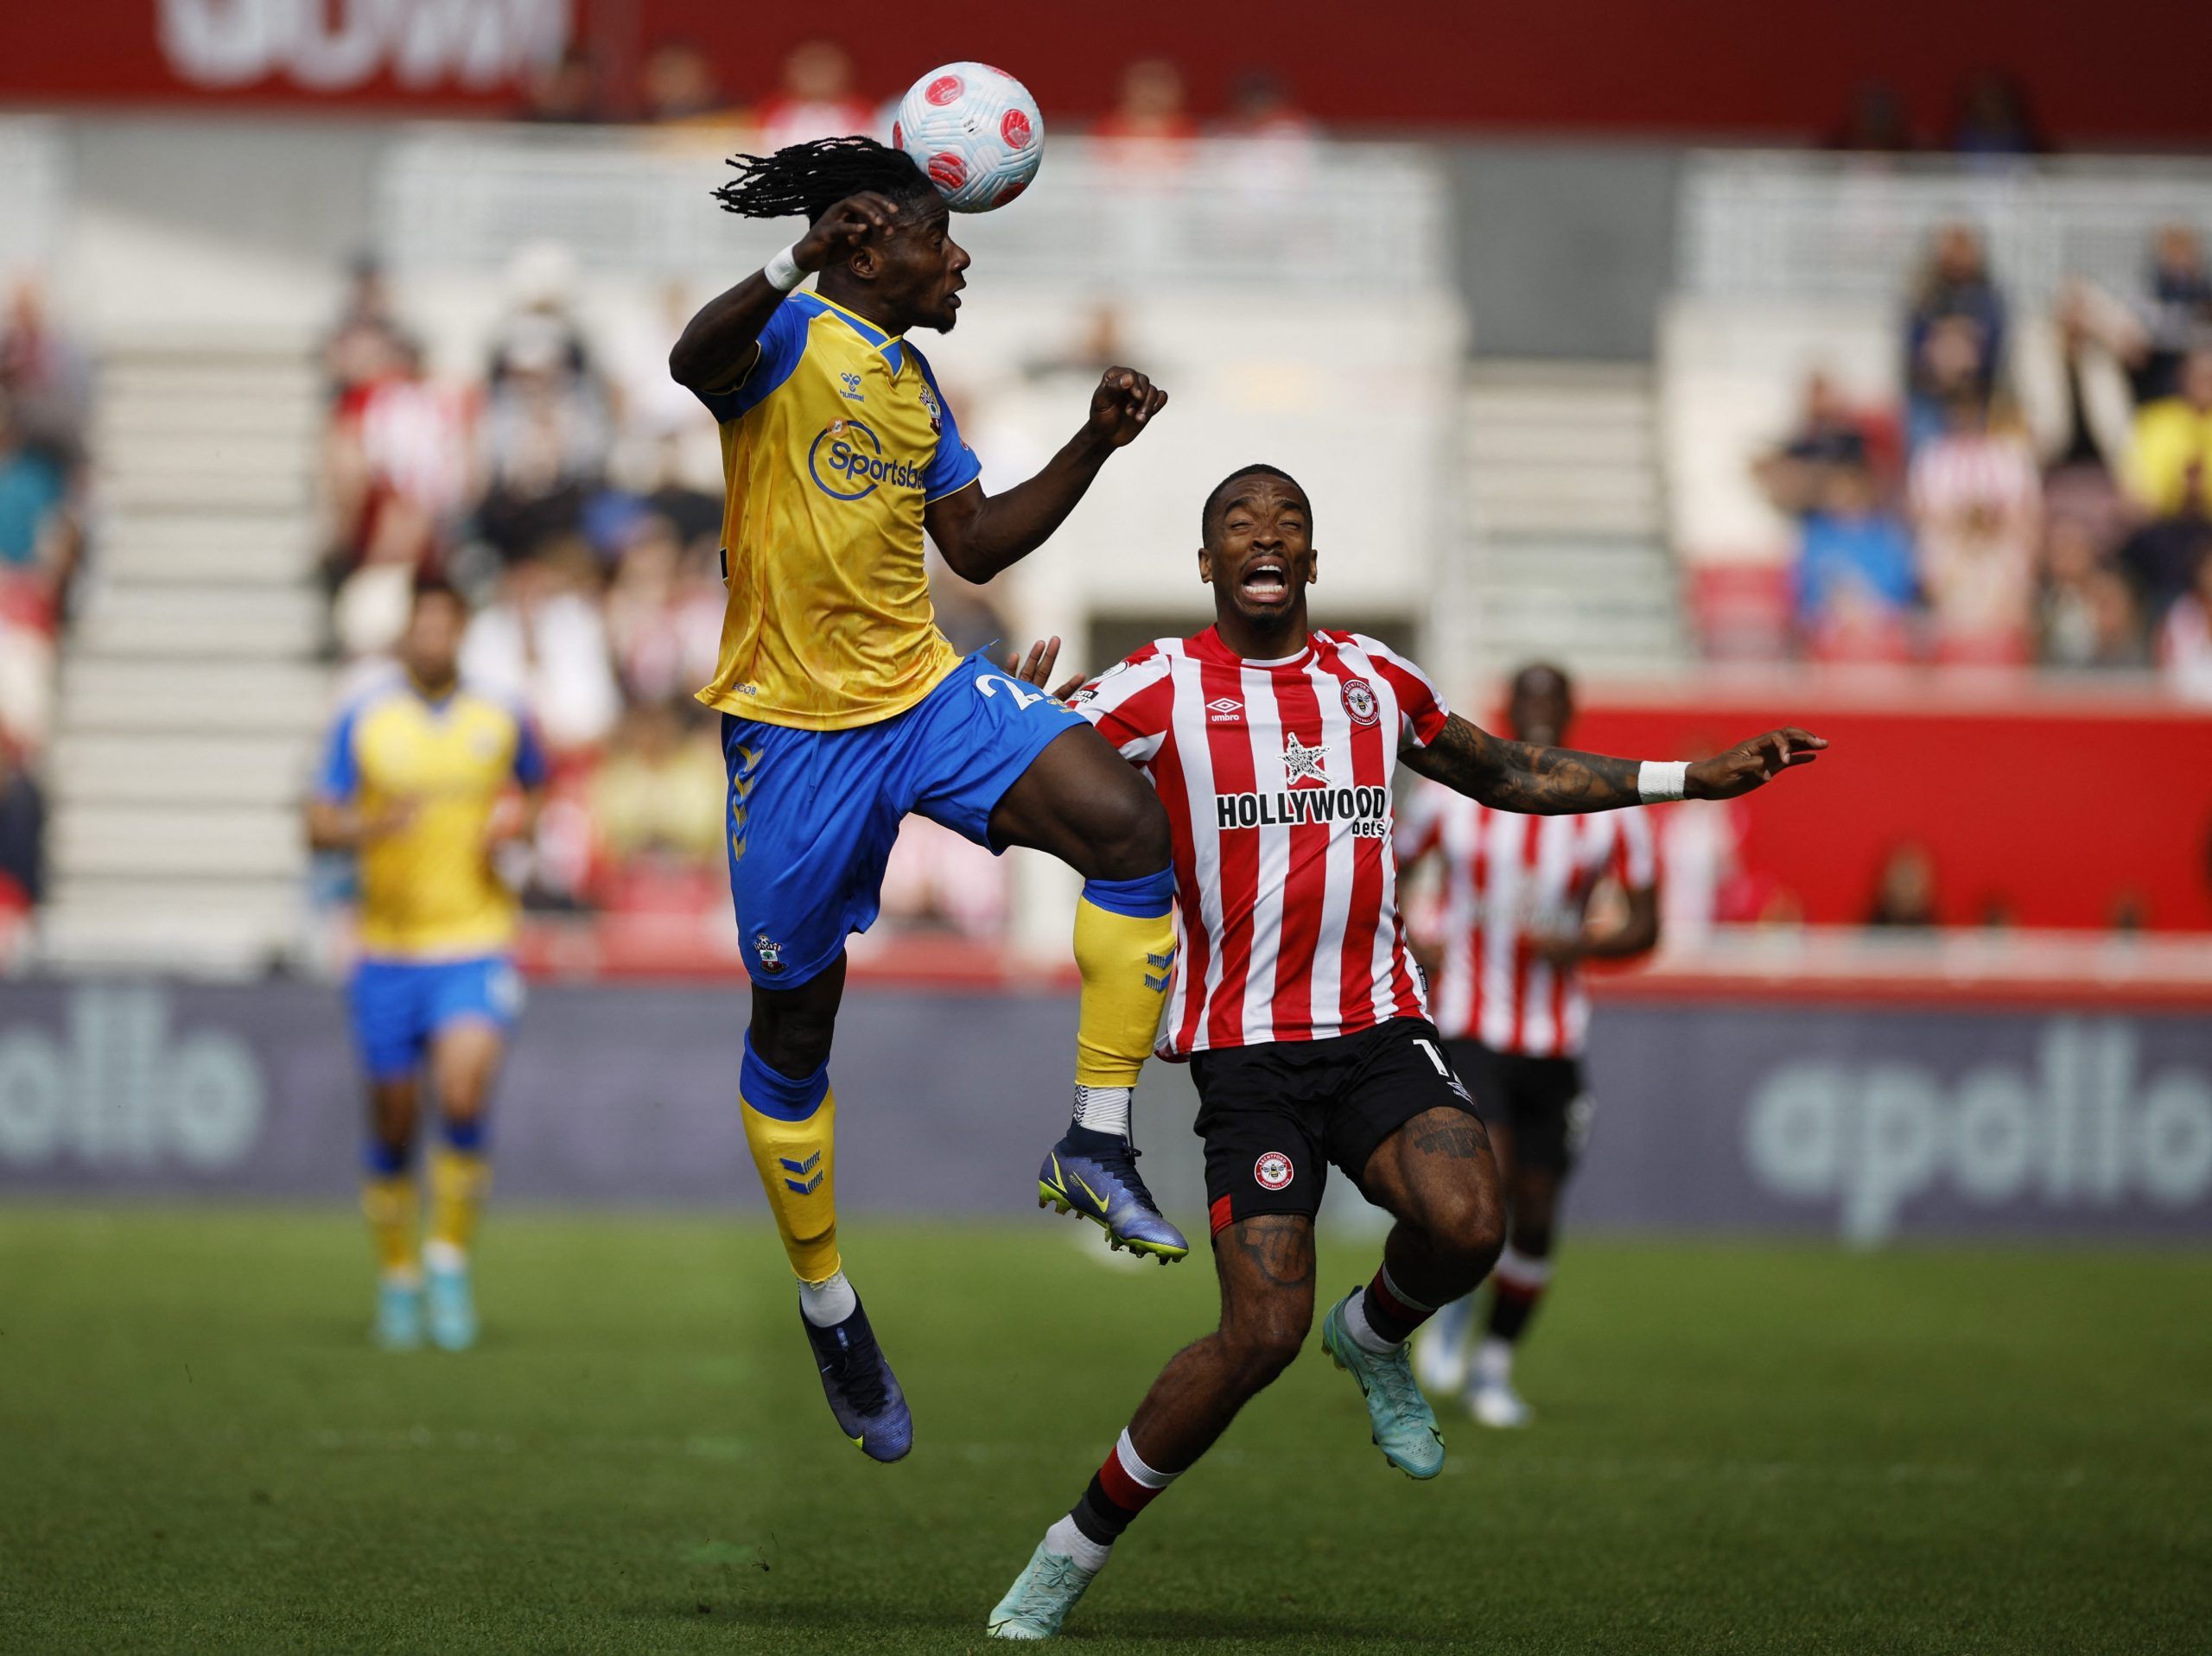 Soccer Football - Premier League - Brentford v Southampton - Brentford Community Stadium, London, Britain - May 7, 2022 Southampton's Mohammed Salisu in action with Brentford's Ivan Toney Action Images via Reuters/John Sibley EDITORIAL USE ONLY. No use with unauthorized audio, video, data, fixture lists, club/league logos or 'live' services. Online in-match use limited to 75 images, no video emulation. No use in betting, games or single club /league/player publications.  Please contact your acco